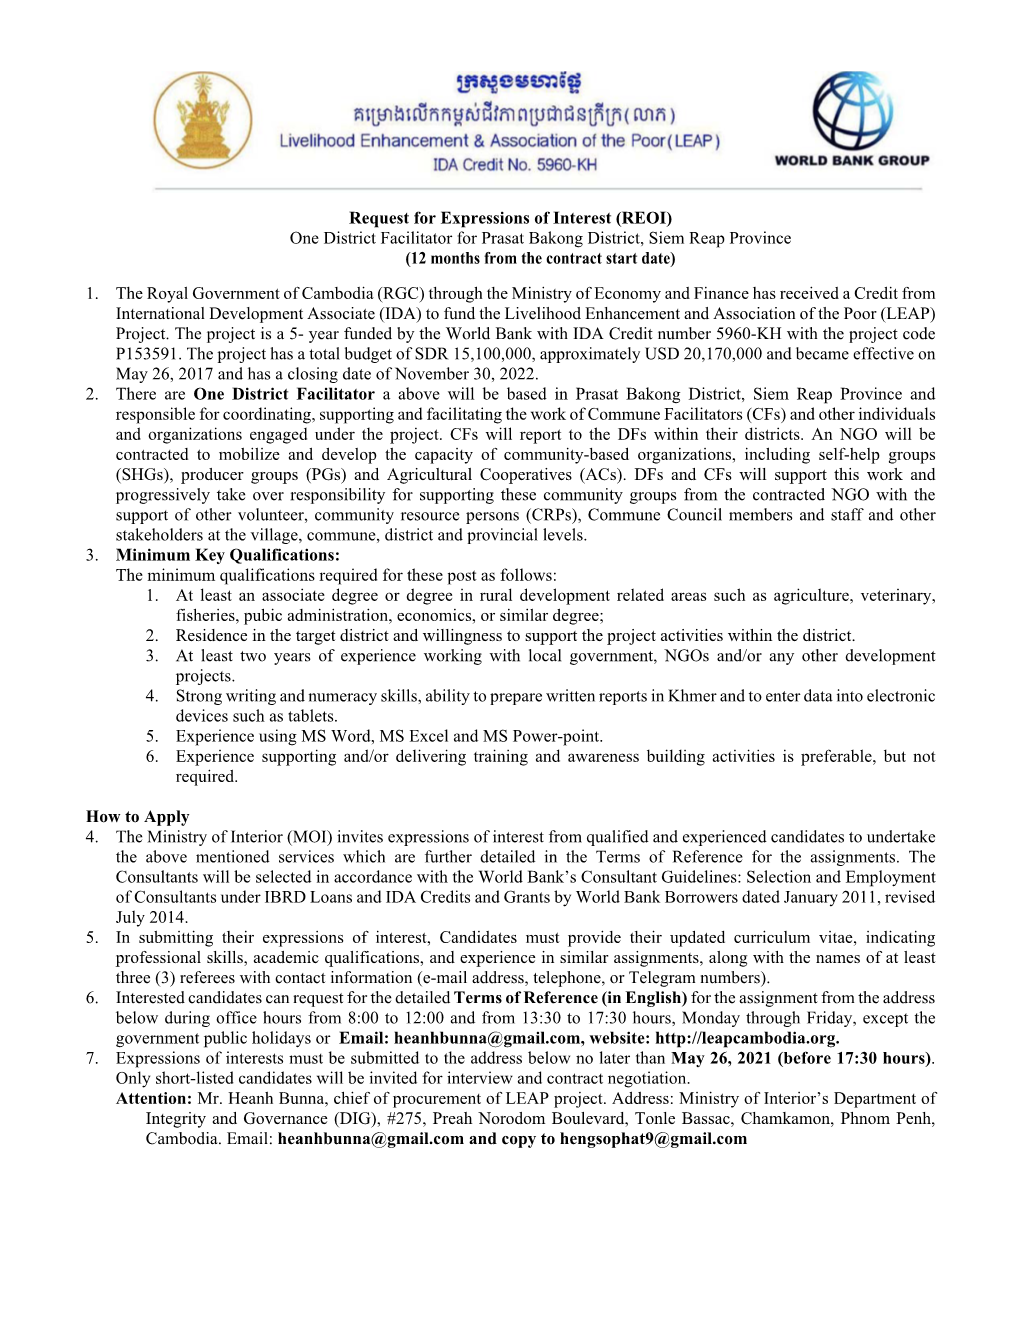 Request for Expressions of Interest (REOI) One District Facilitator for Prasat Bakong District, Siem Reap Province (12 Months from the Contract Start Date)